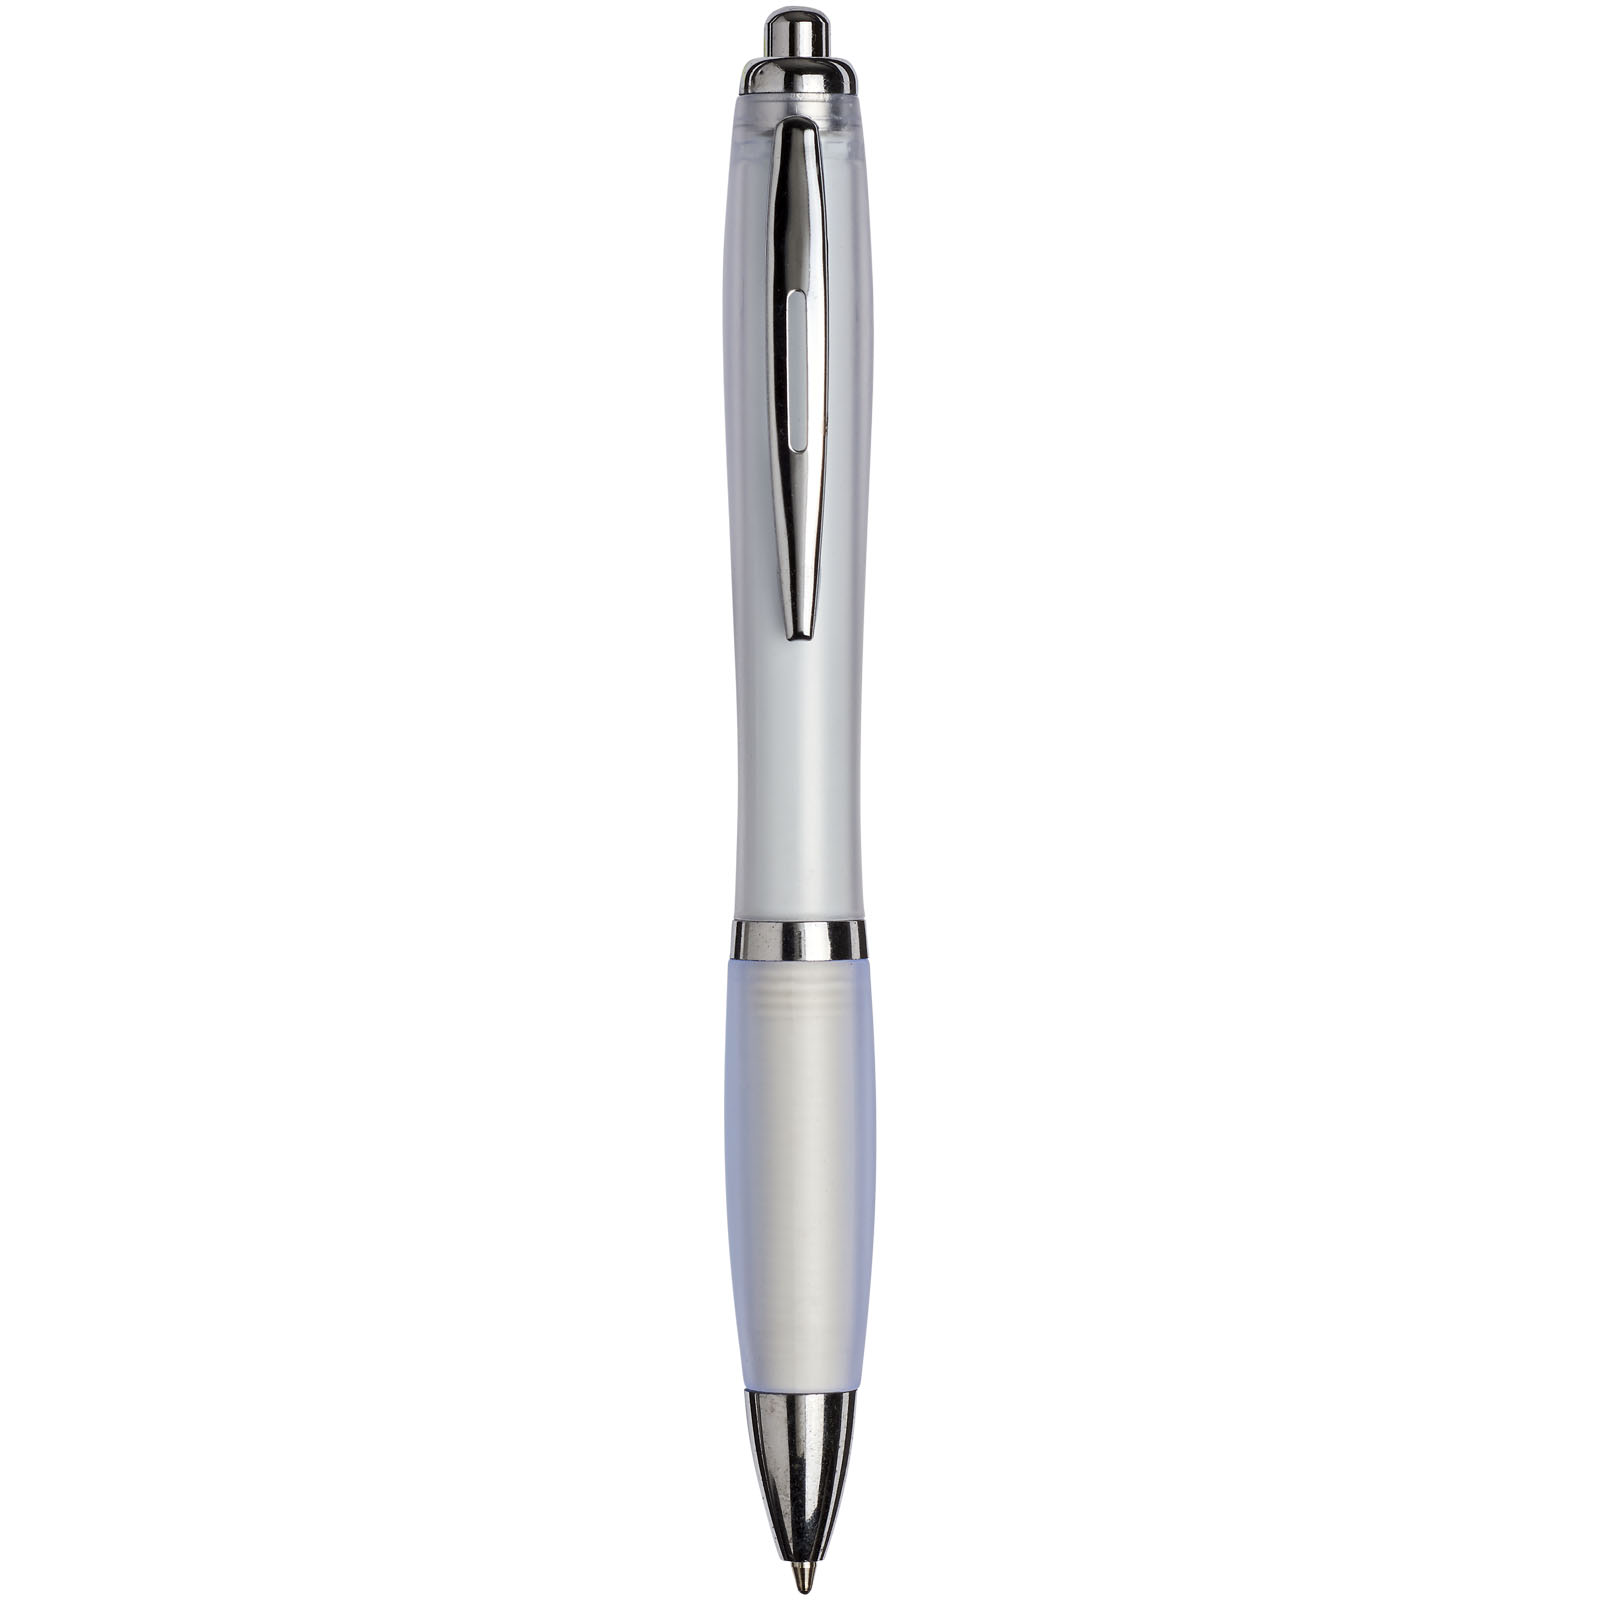 Advertising Ballpoint Pens - Curvy ballpoint pen with frosted barrel and grip - 0